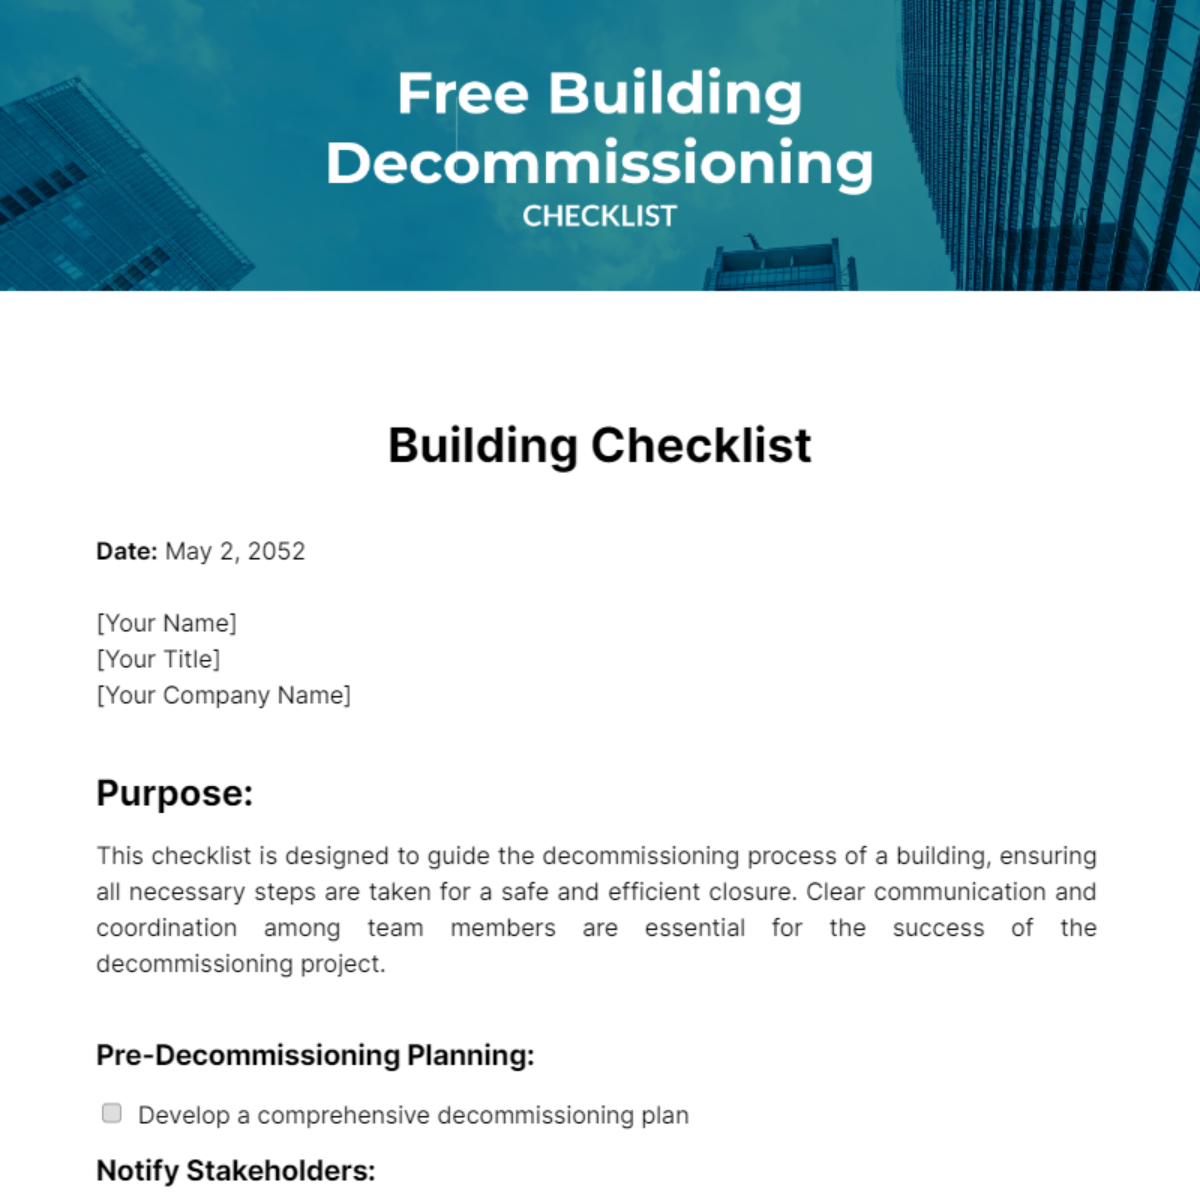 Free Building Decommissioning Checklist Template